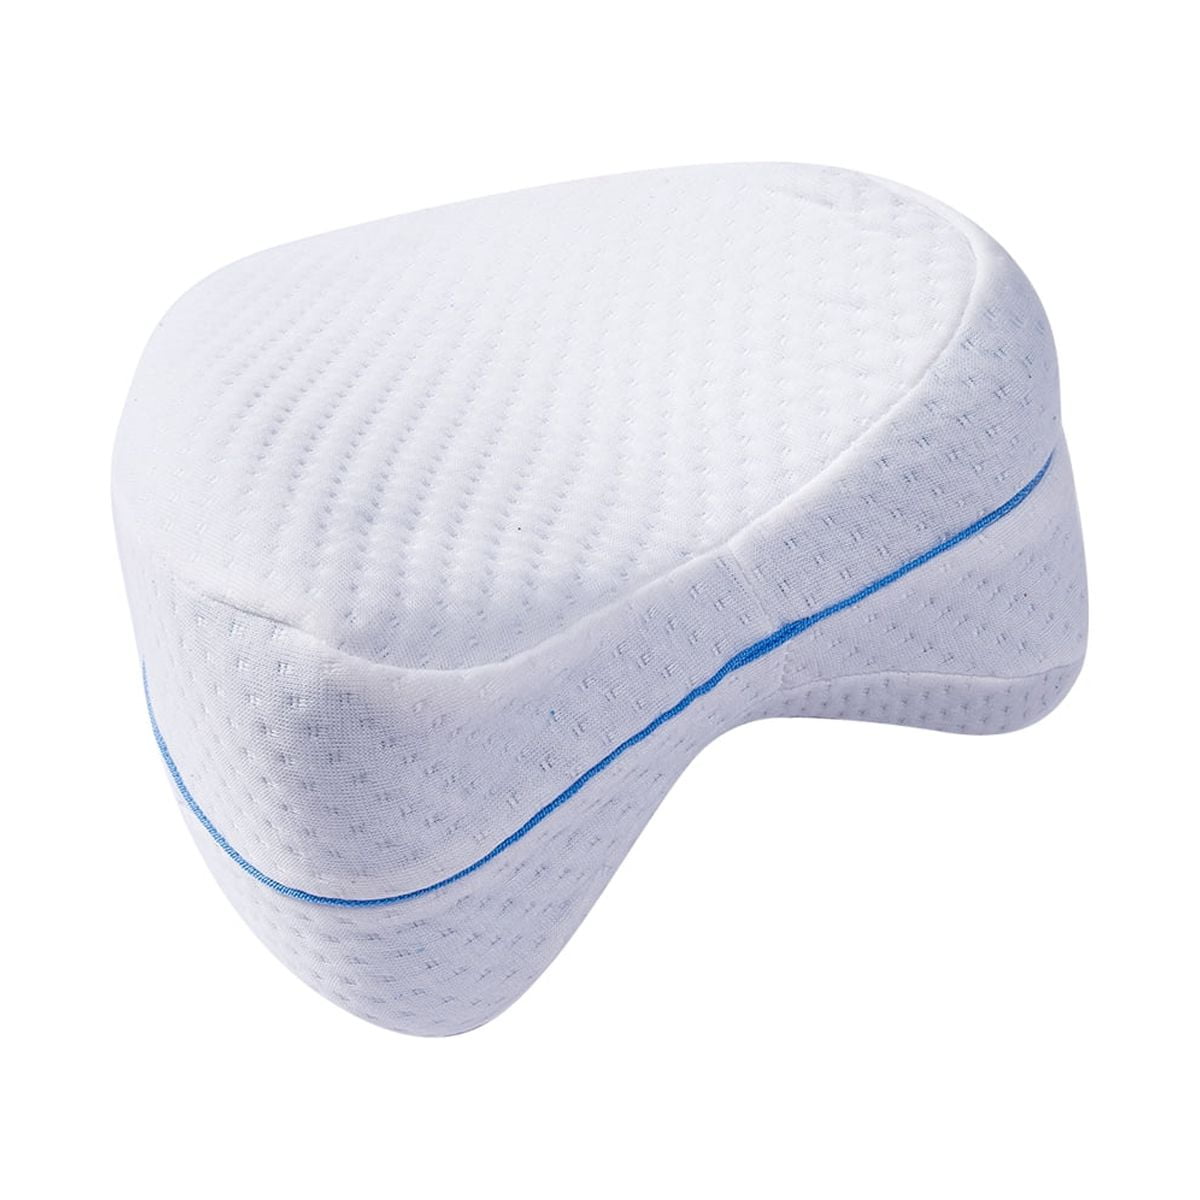 Milliard Lumbar Support Pillow for Bed with Gel Memory Foam Top -Helps with Lower  Back Pain Relief for Sleeping, Hip, Knee and Spine Alignment, Sciatic Nerve Waist  Cushion - Washable Cover (3.5 Inch)